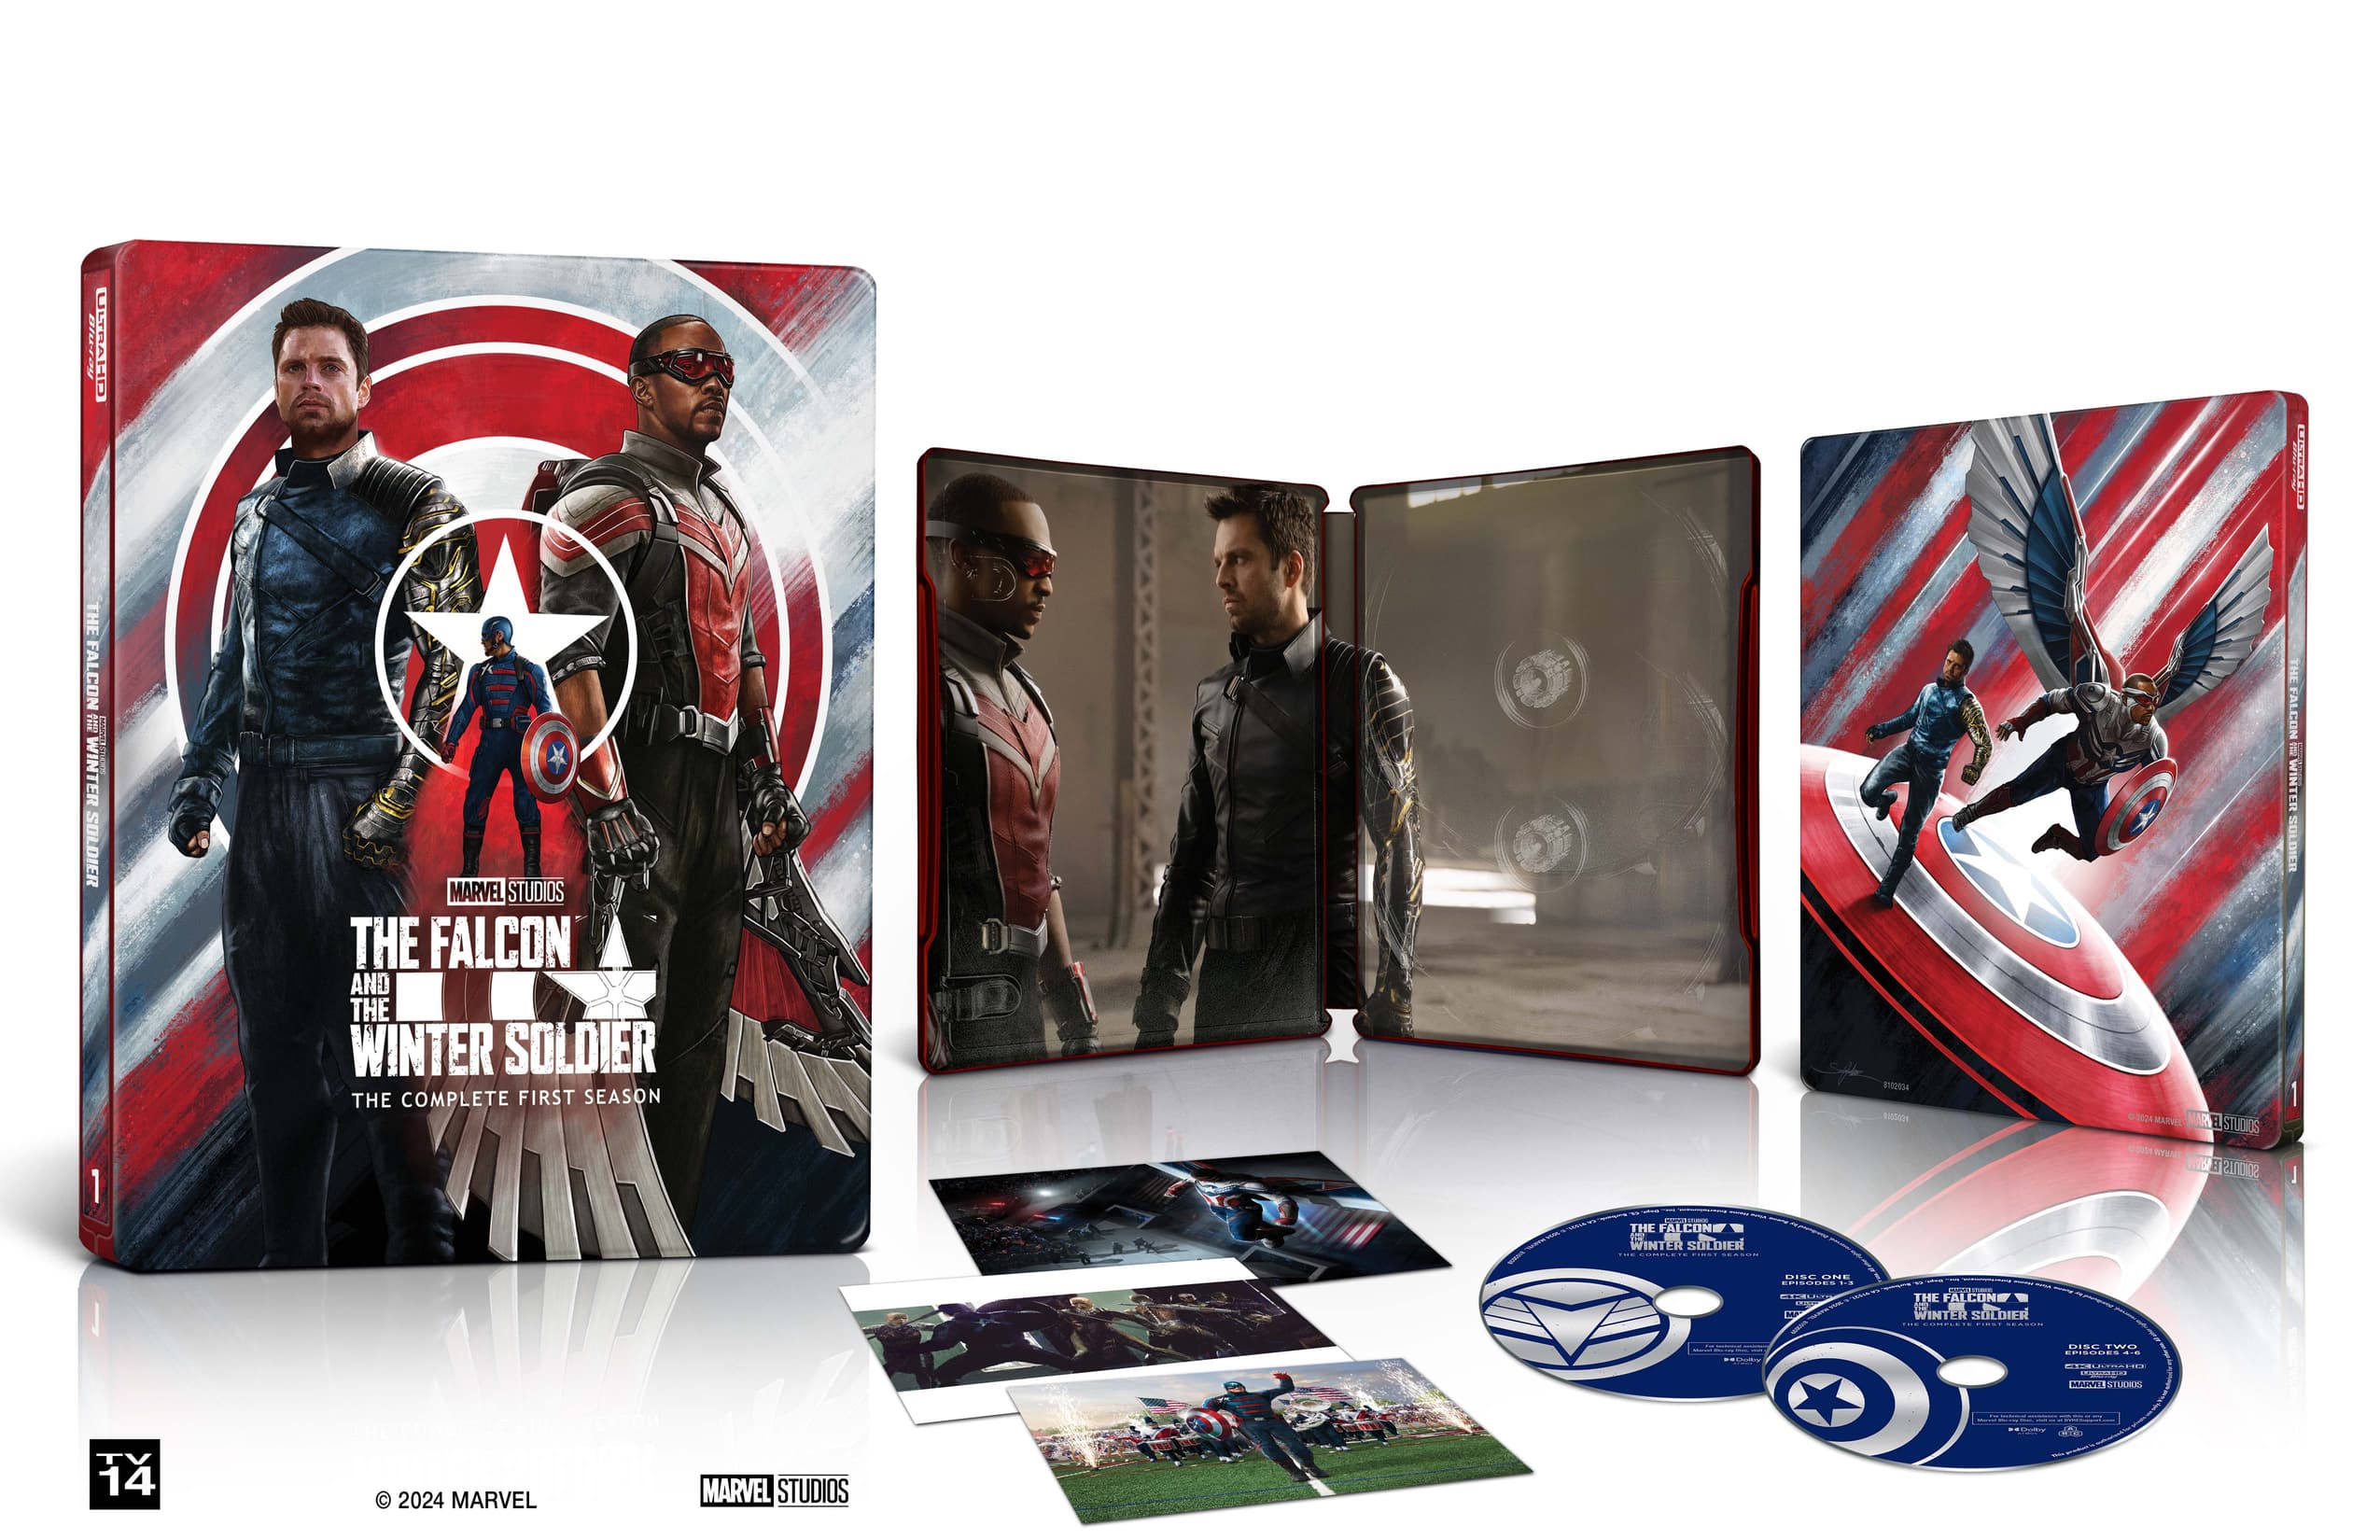 Marvel Studios' The Falcon and The Winter Soldier 4K UHD Steelbook